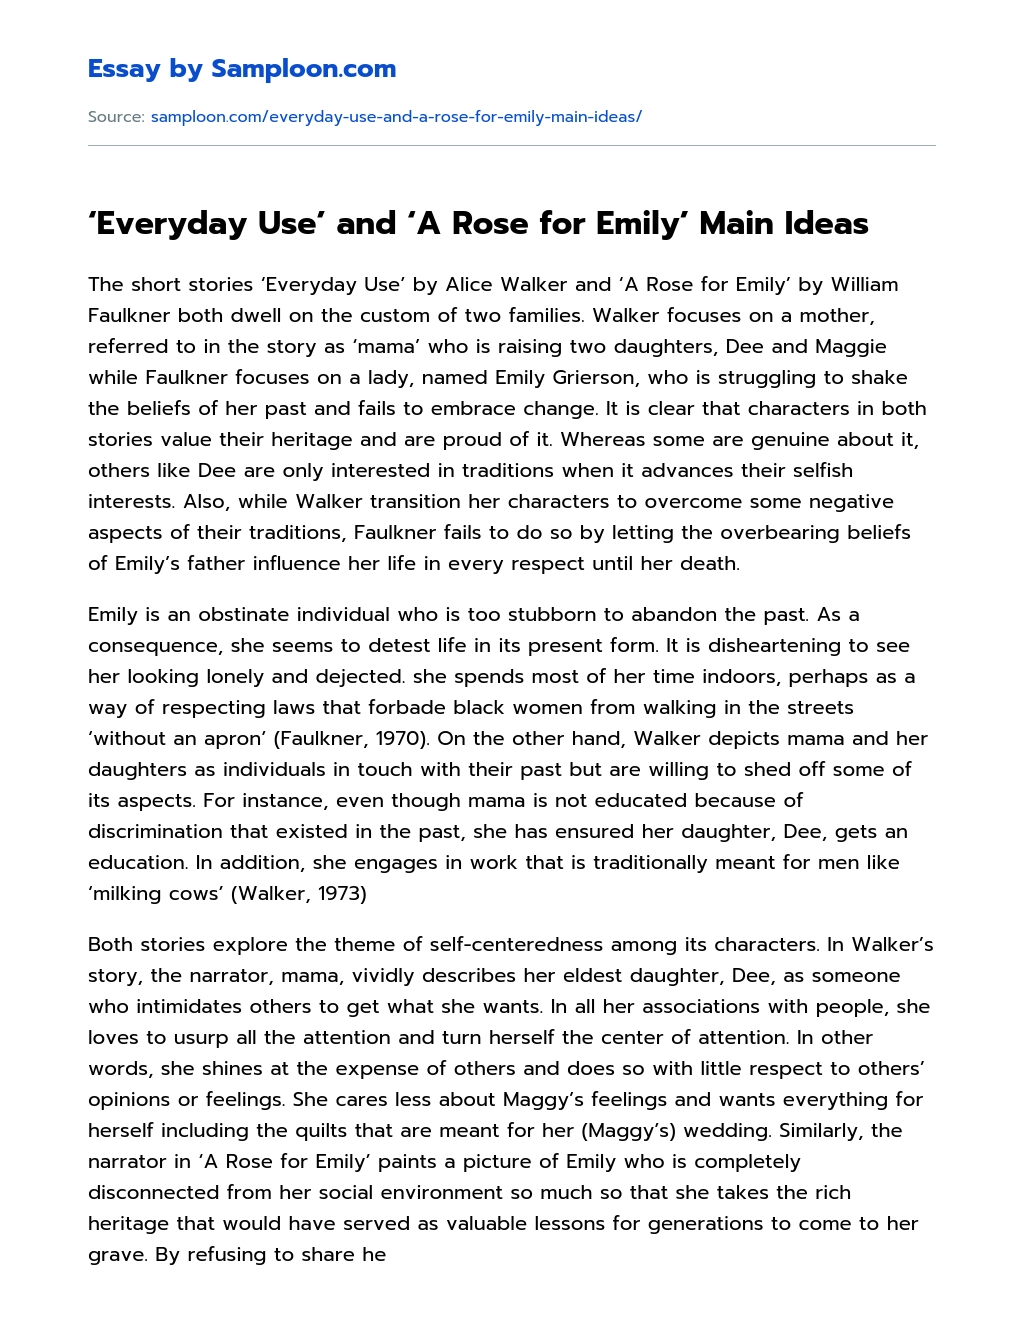 ‘Everyday Use’ and ‘A Rose for Emily’ Main Ideas Compare And Contrast essay